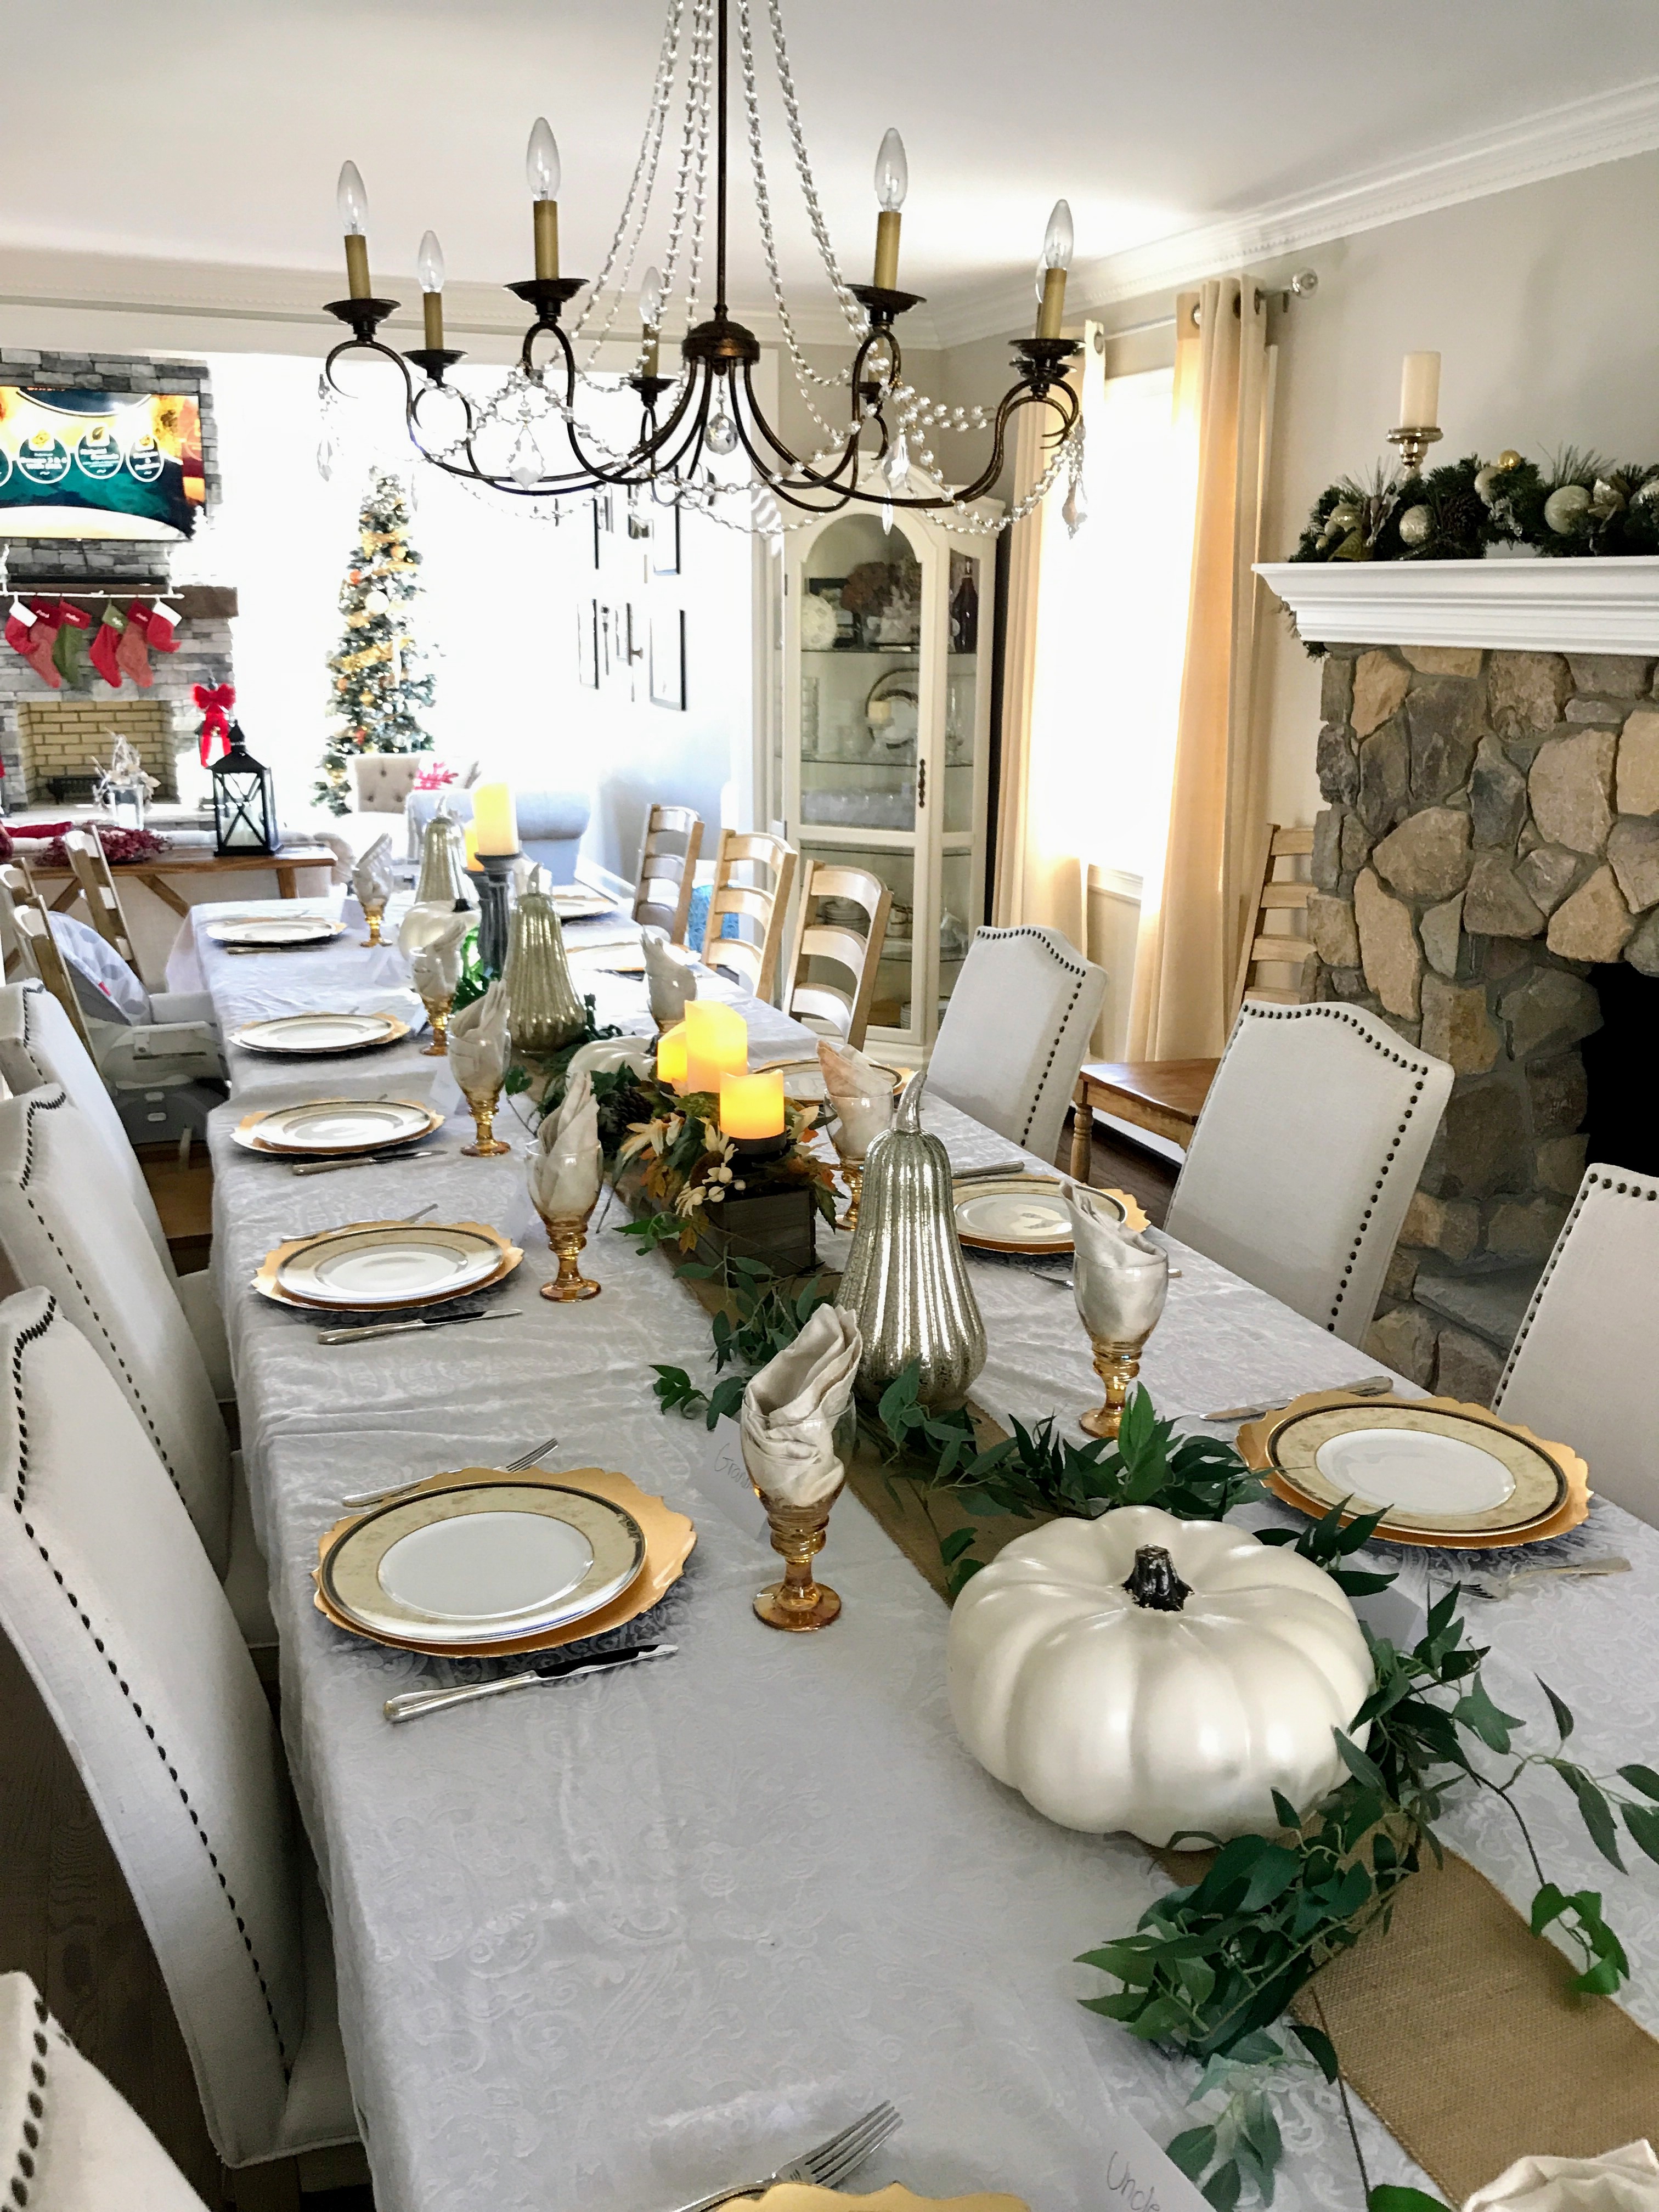 Thanksgiving Photos from Our Staff - The Martha Stewart Blog